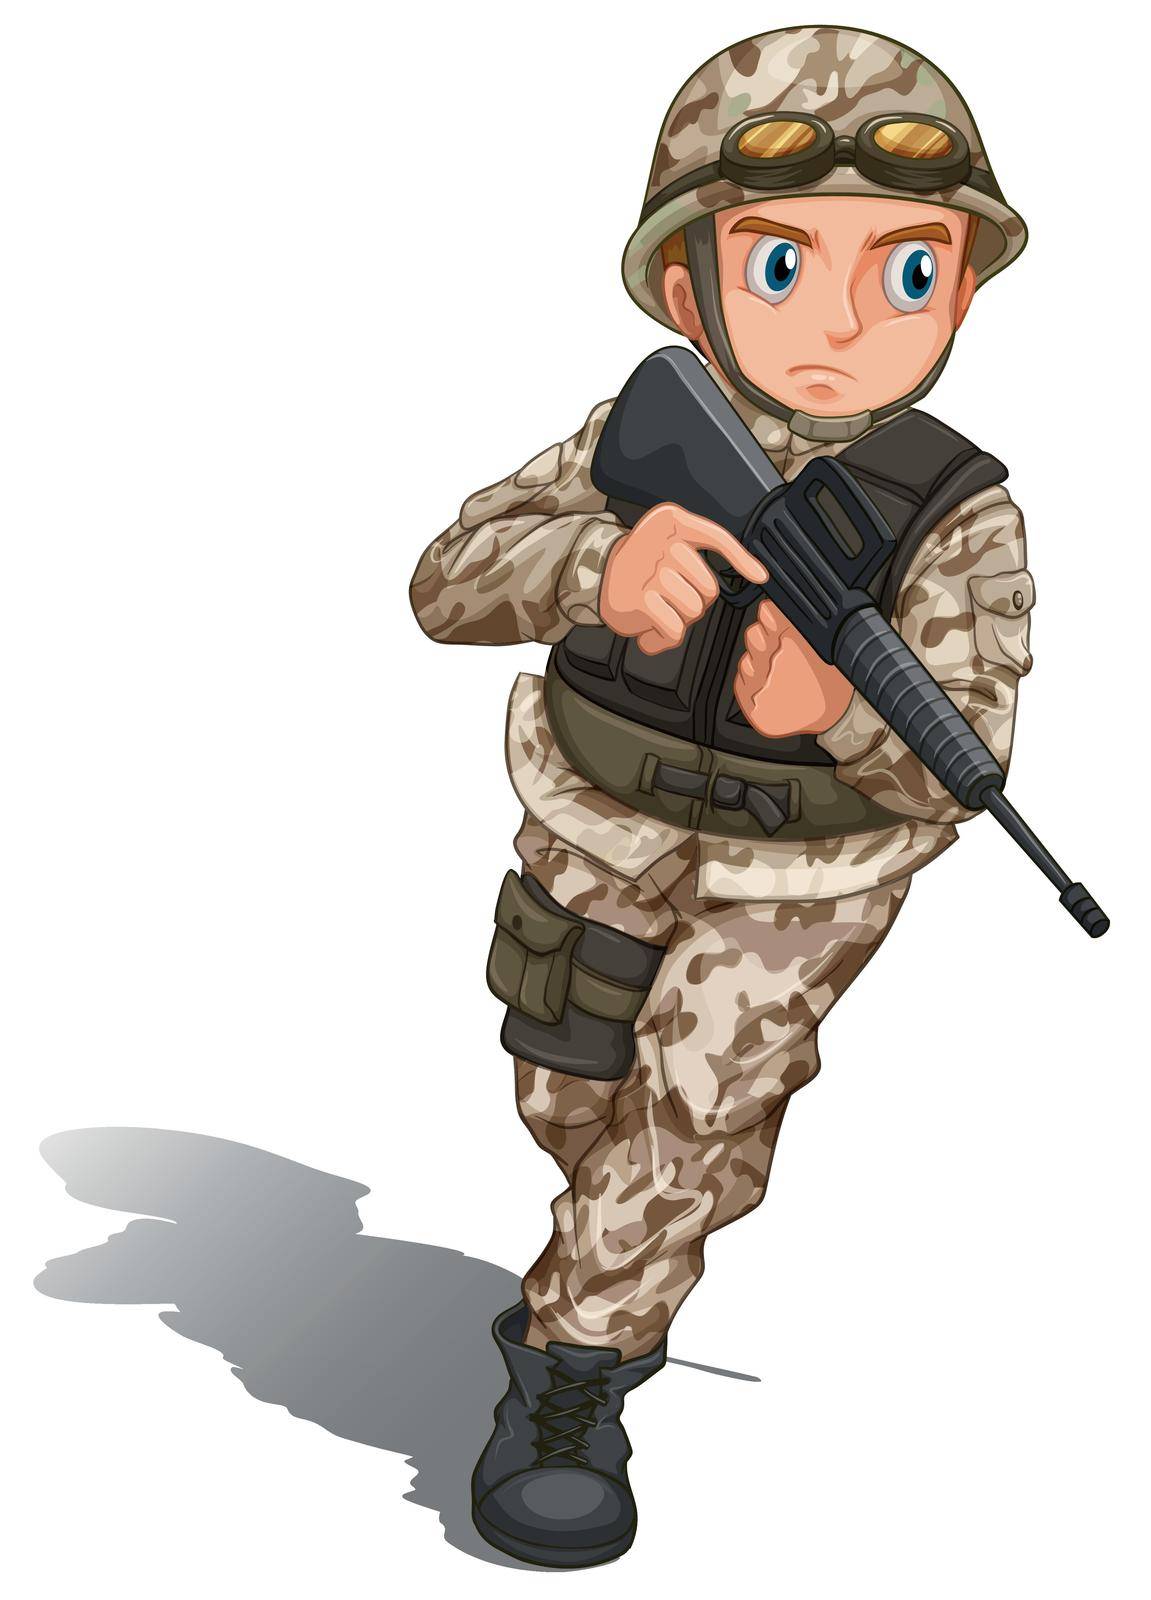 Illustration of a brave soldier with a gun on a white background